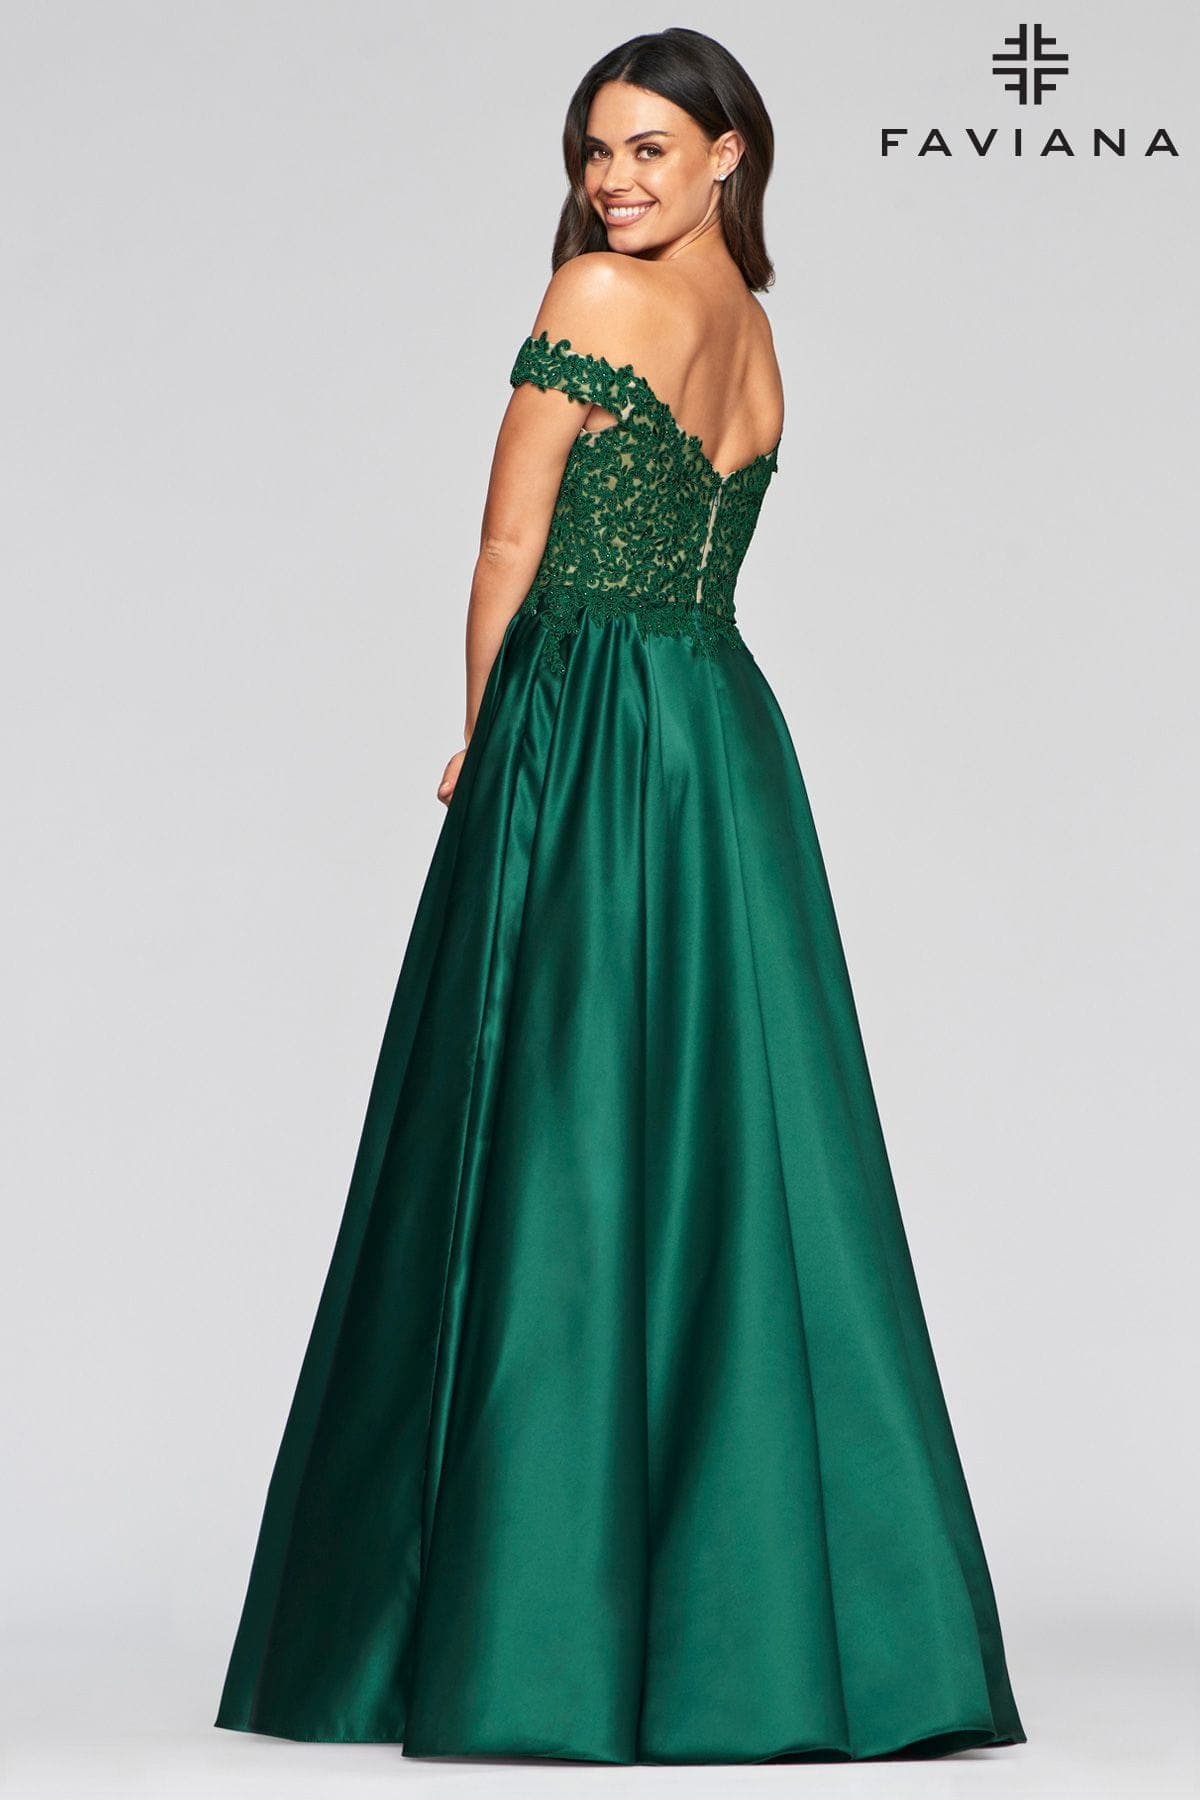 Off The Shoulder Ballgown Dress With Satin Skirt And Lace Bodice